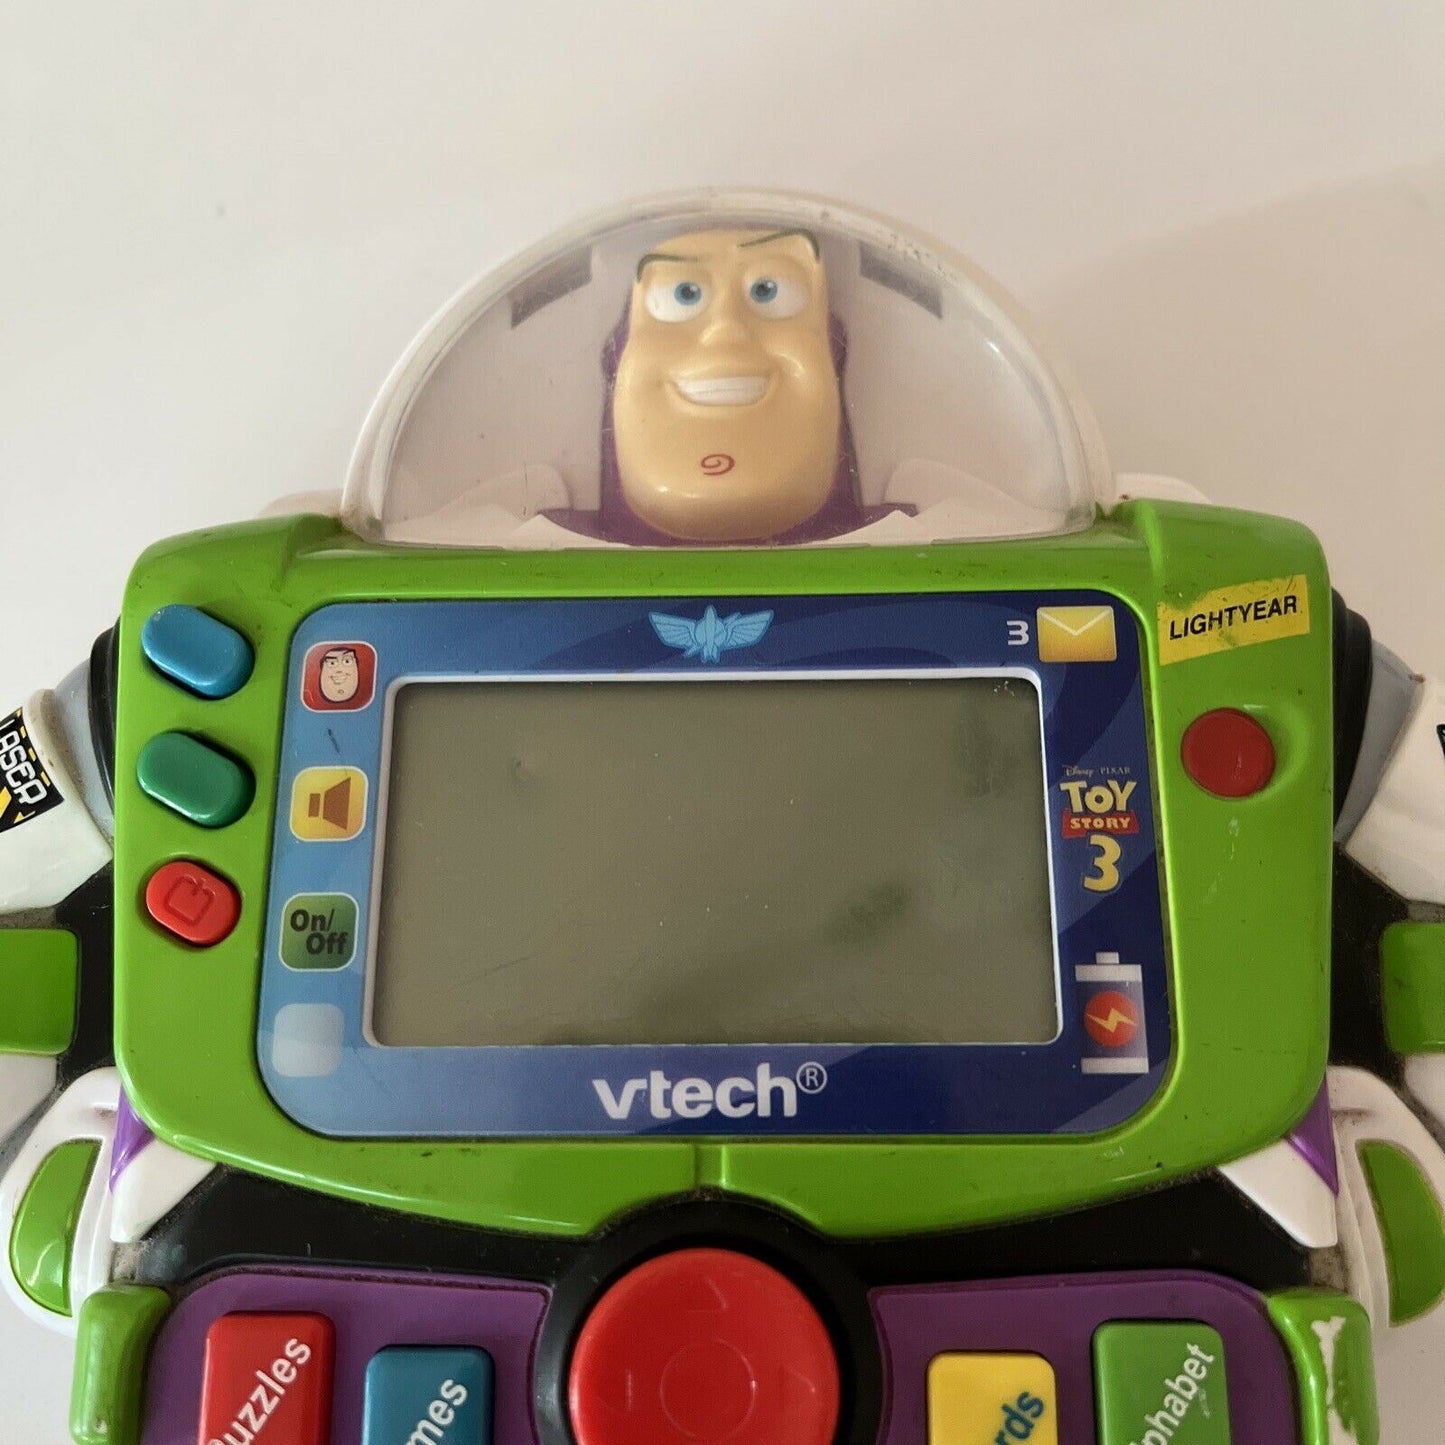 Vtech Toy Story Buzz Lightyear Learn & Go Handheld Game